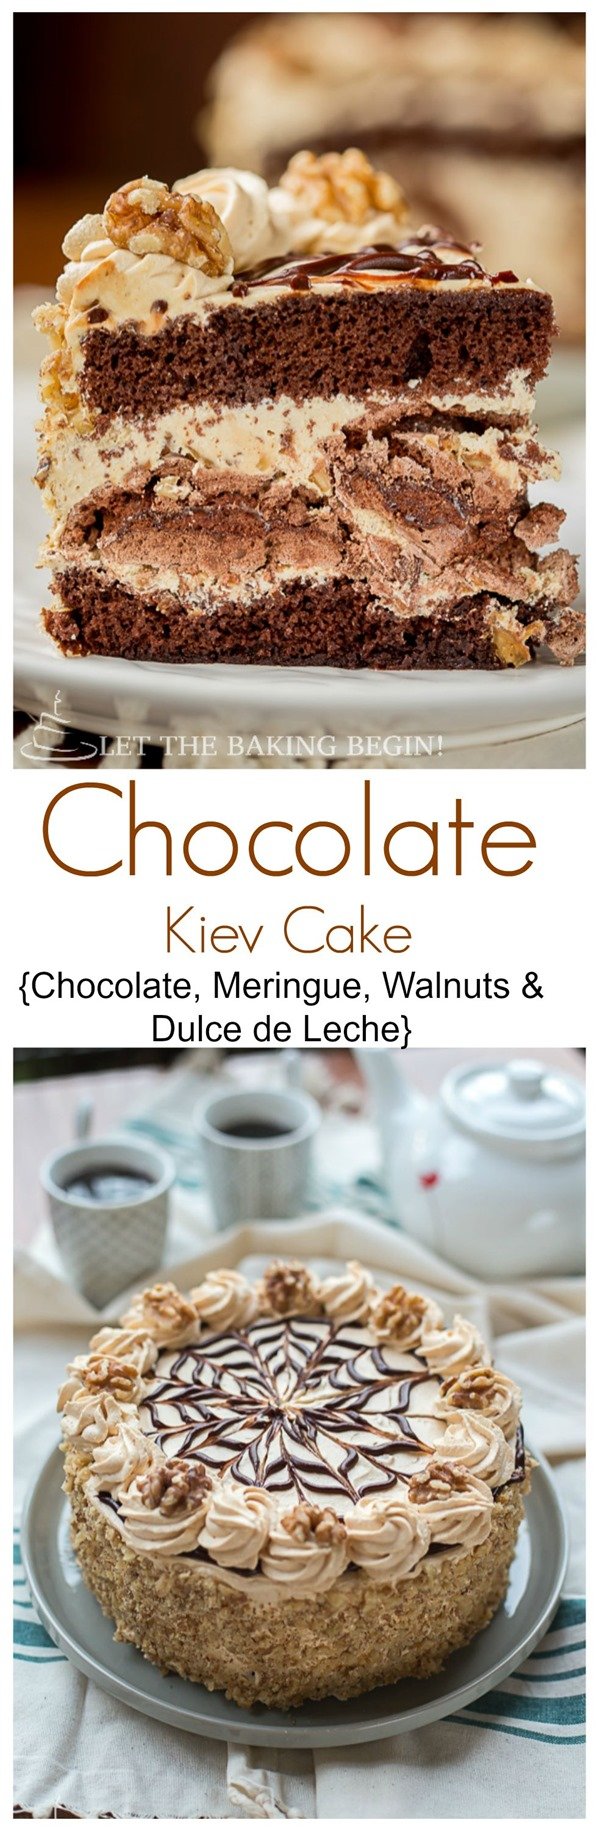 Chocolate Kiev Cake -Soft Chocolate Sponge cake layers are filed with Light Dulce de Leche Buttercream and Chocolate Walnut Meringue to make a Chocolate version of the most iconic Ukrainian Kiev Cake - By Let the Baking Begin Blog - @Letthebakingbgn